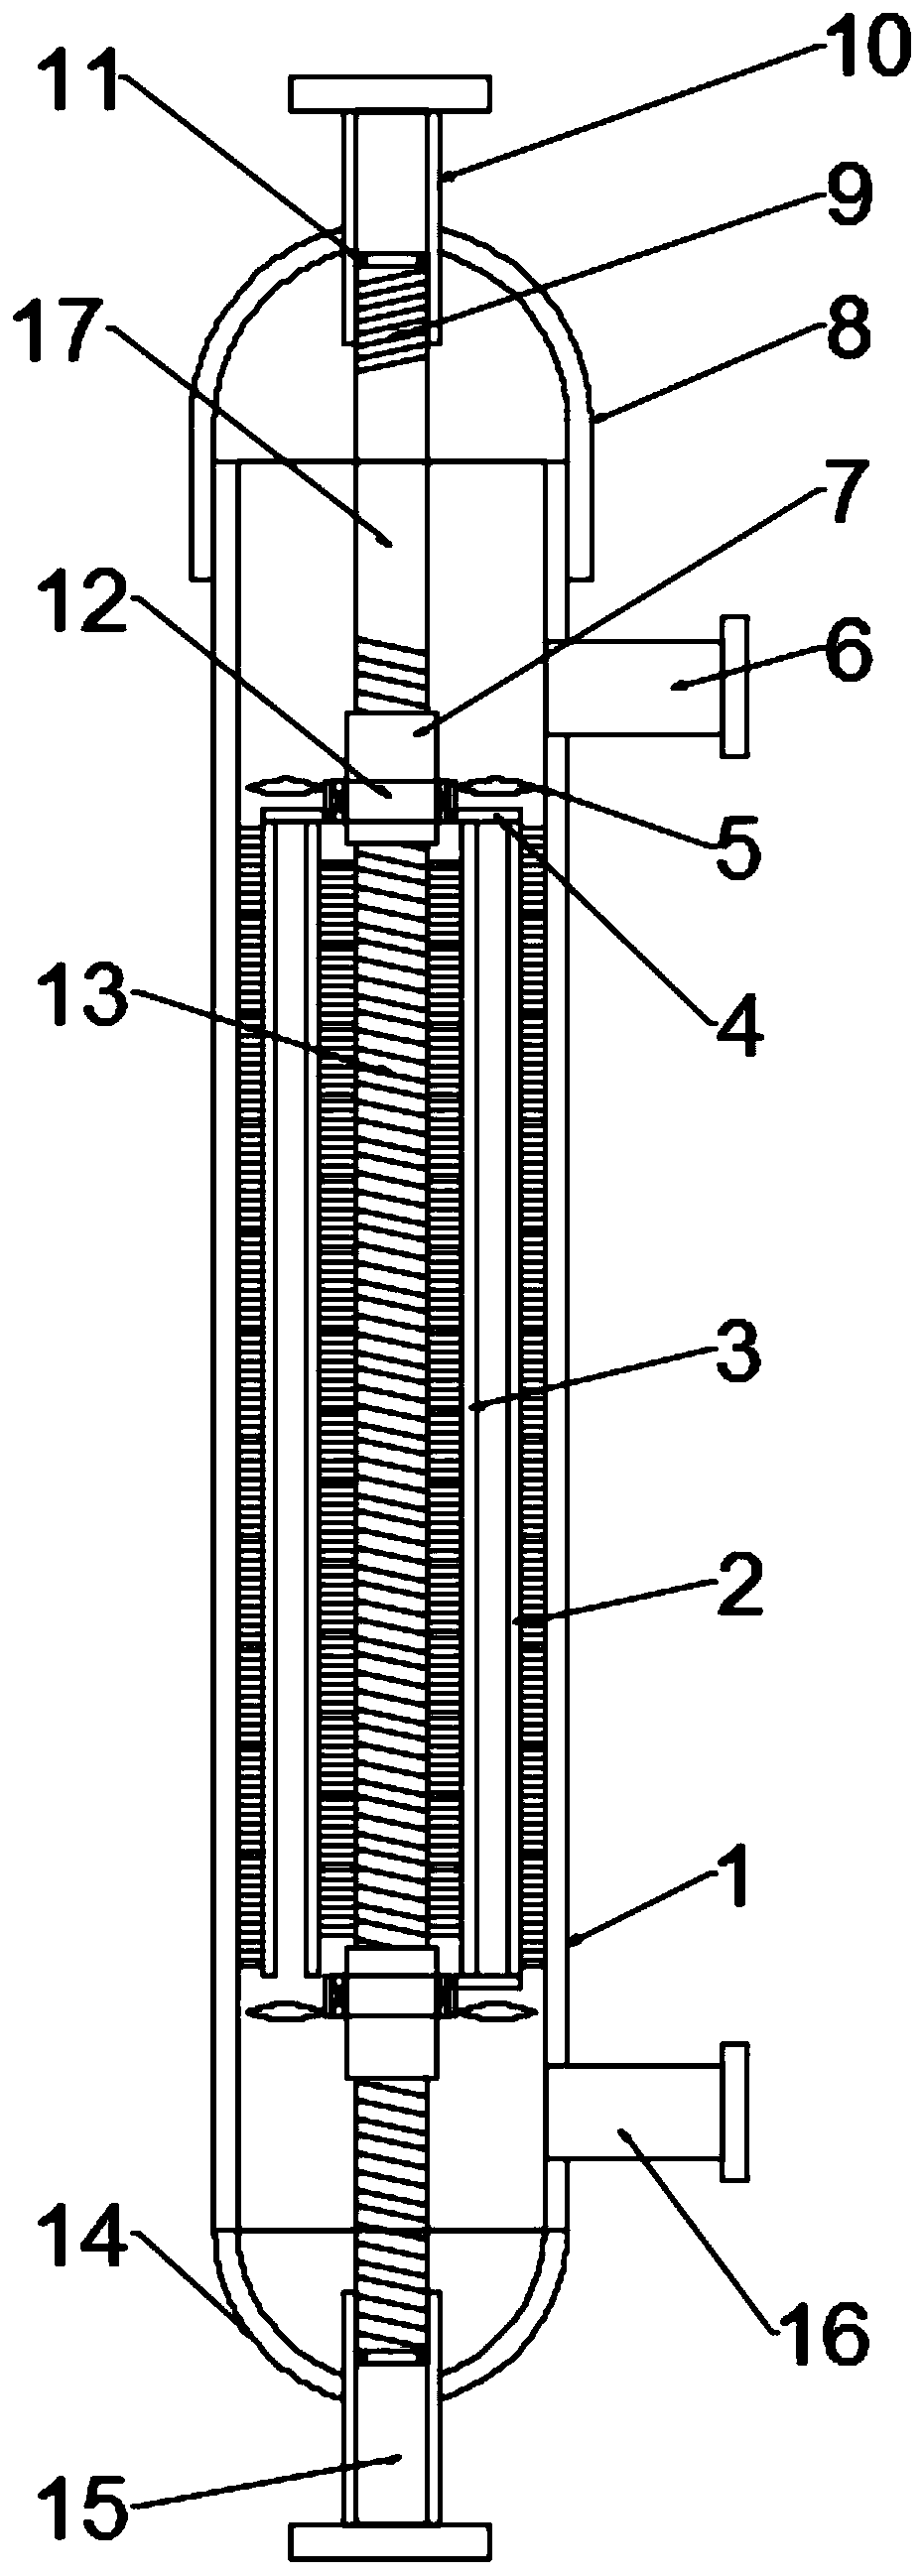 Heat exchanger for pure electric automobile cooling system